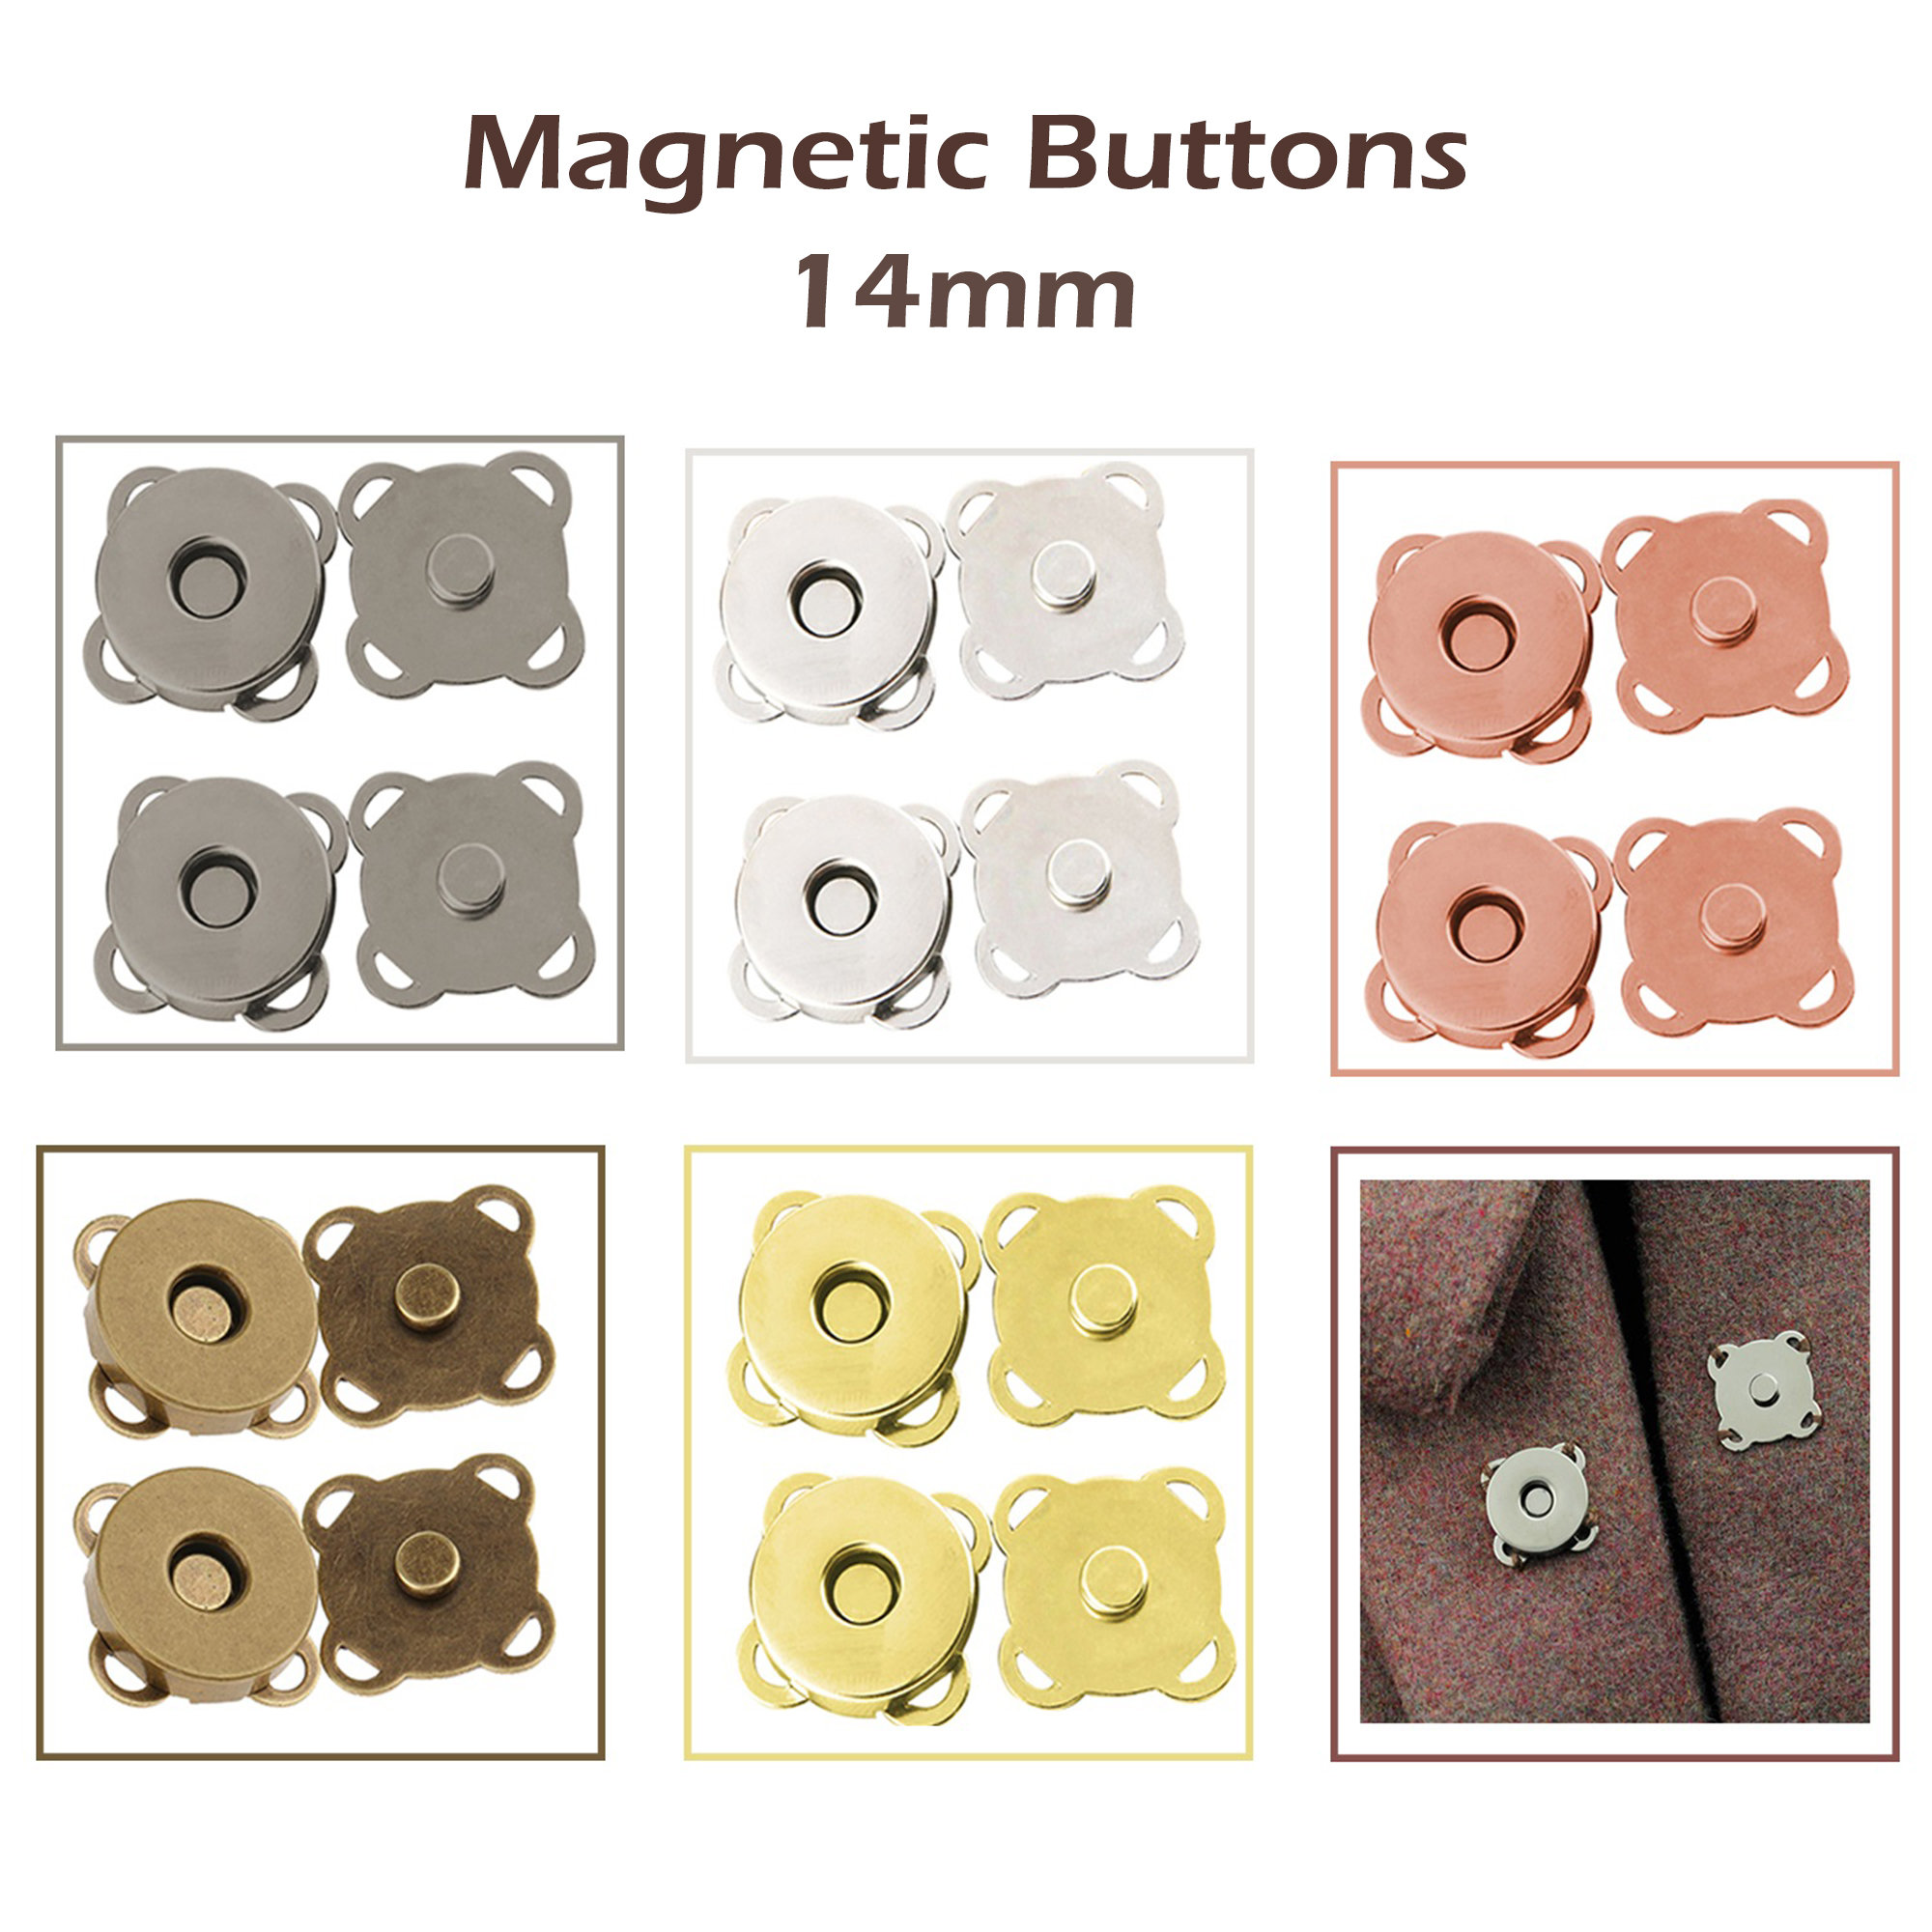 25mm (1) UFO Magnetic Purse Snaps - Gold - (MAGNET SNAP Mag-184)